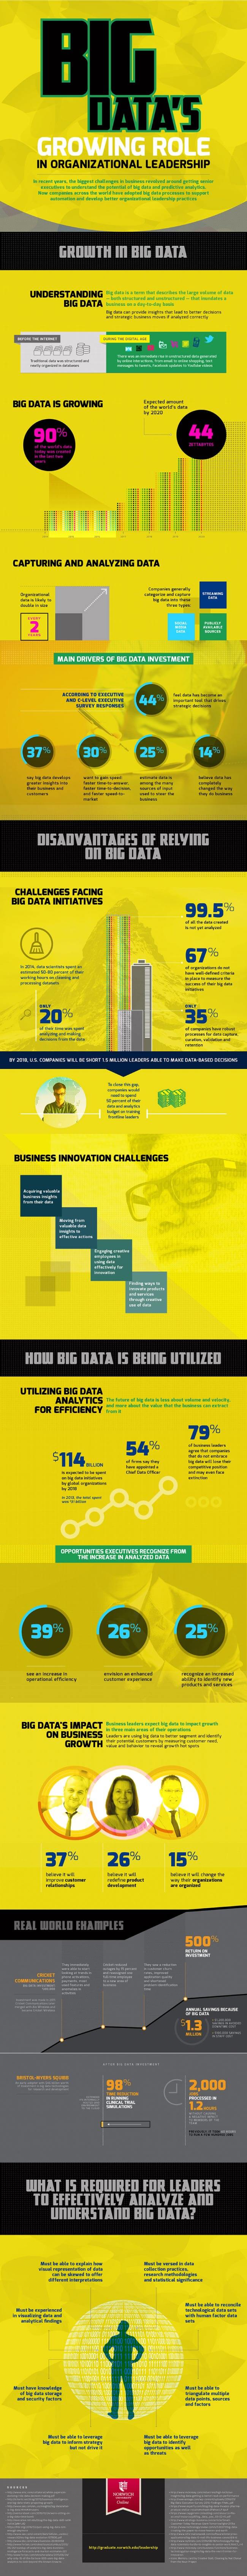 Image titled big data s growing role in organizational leadership